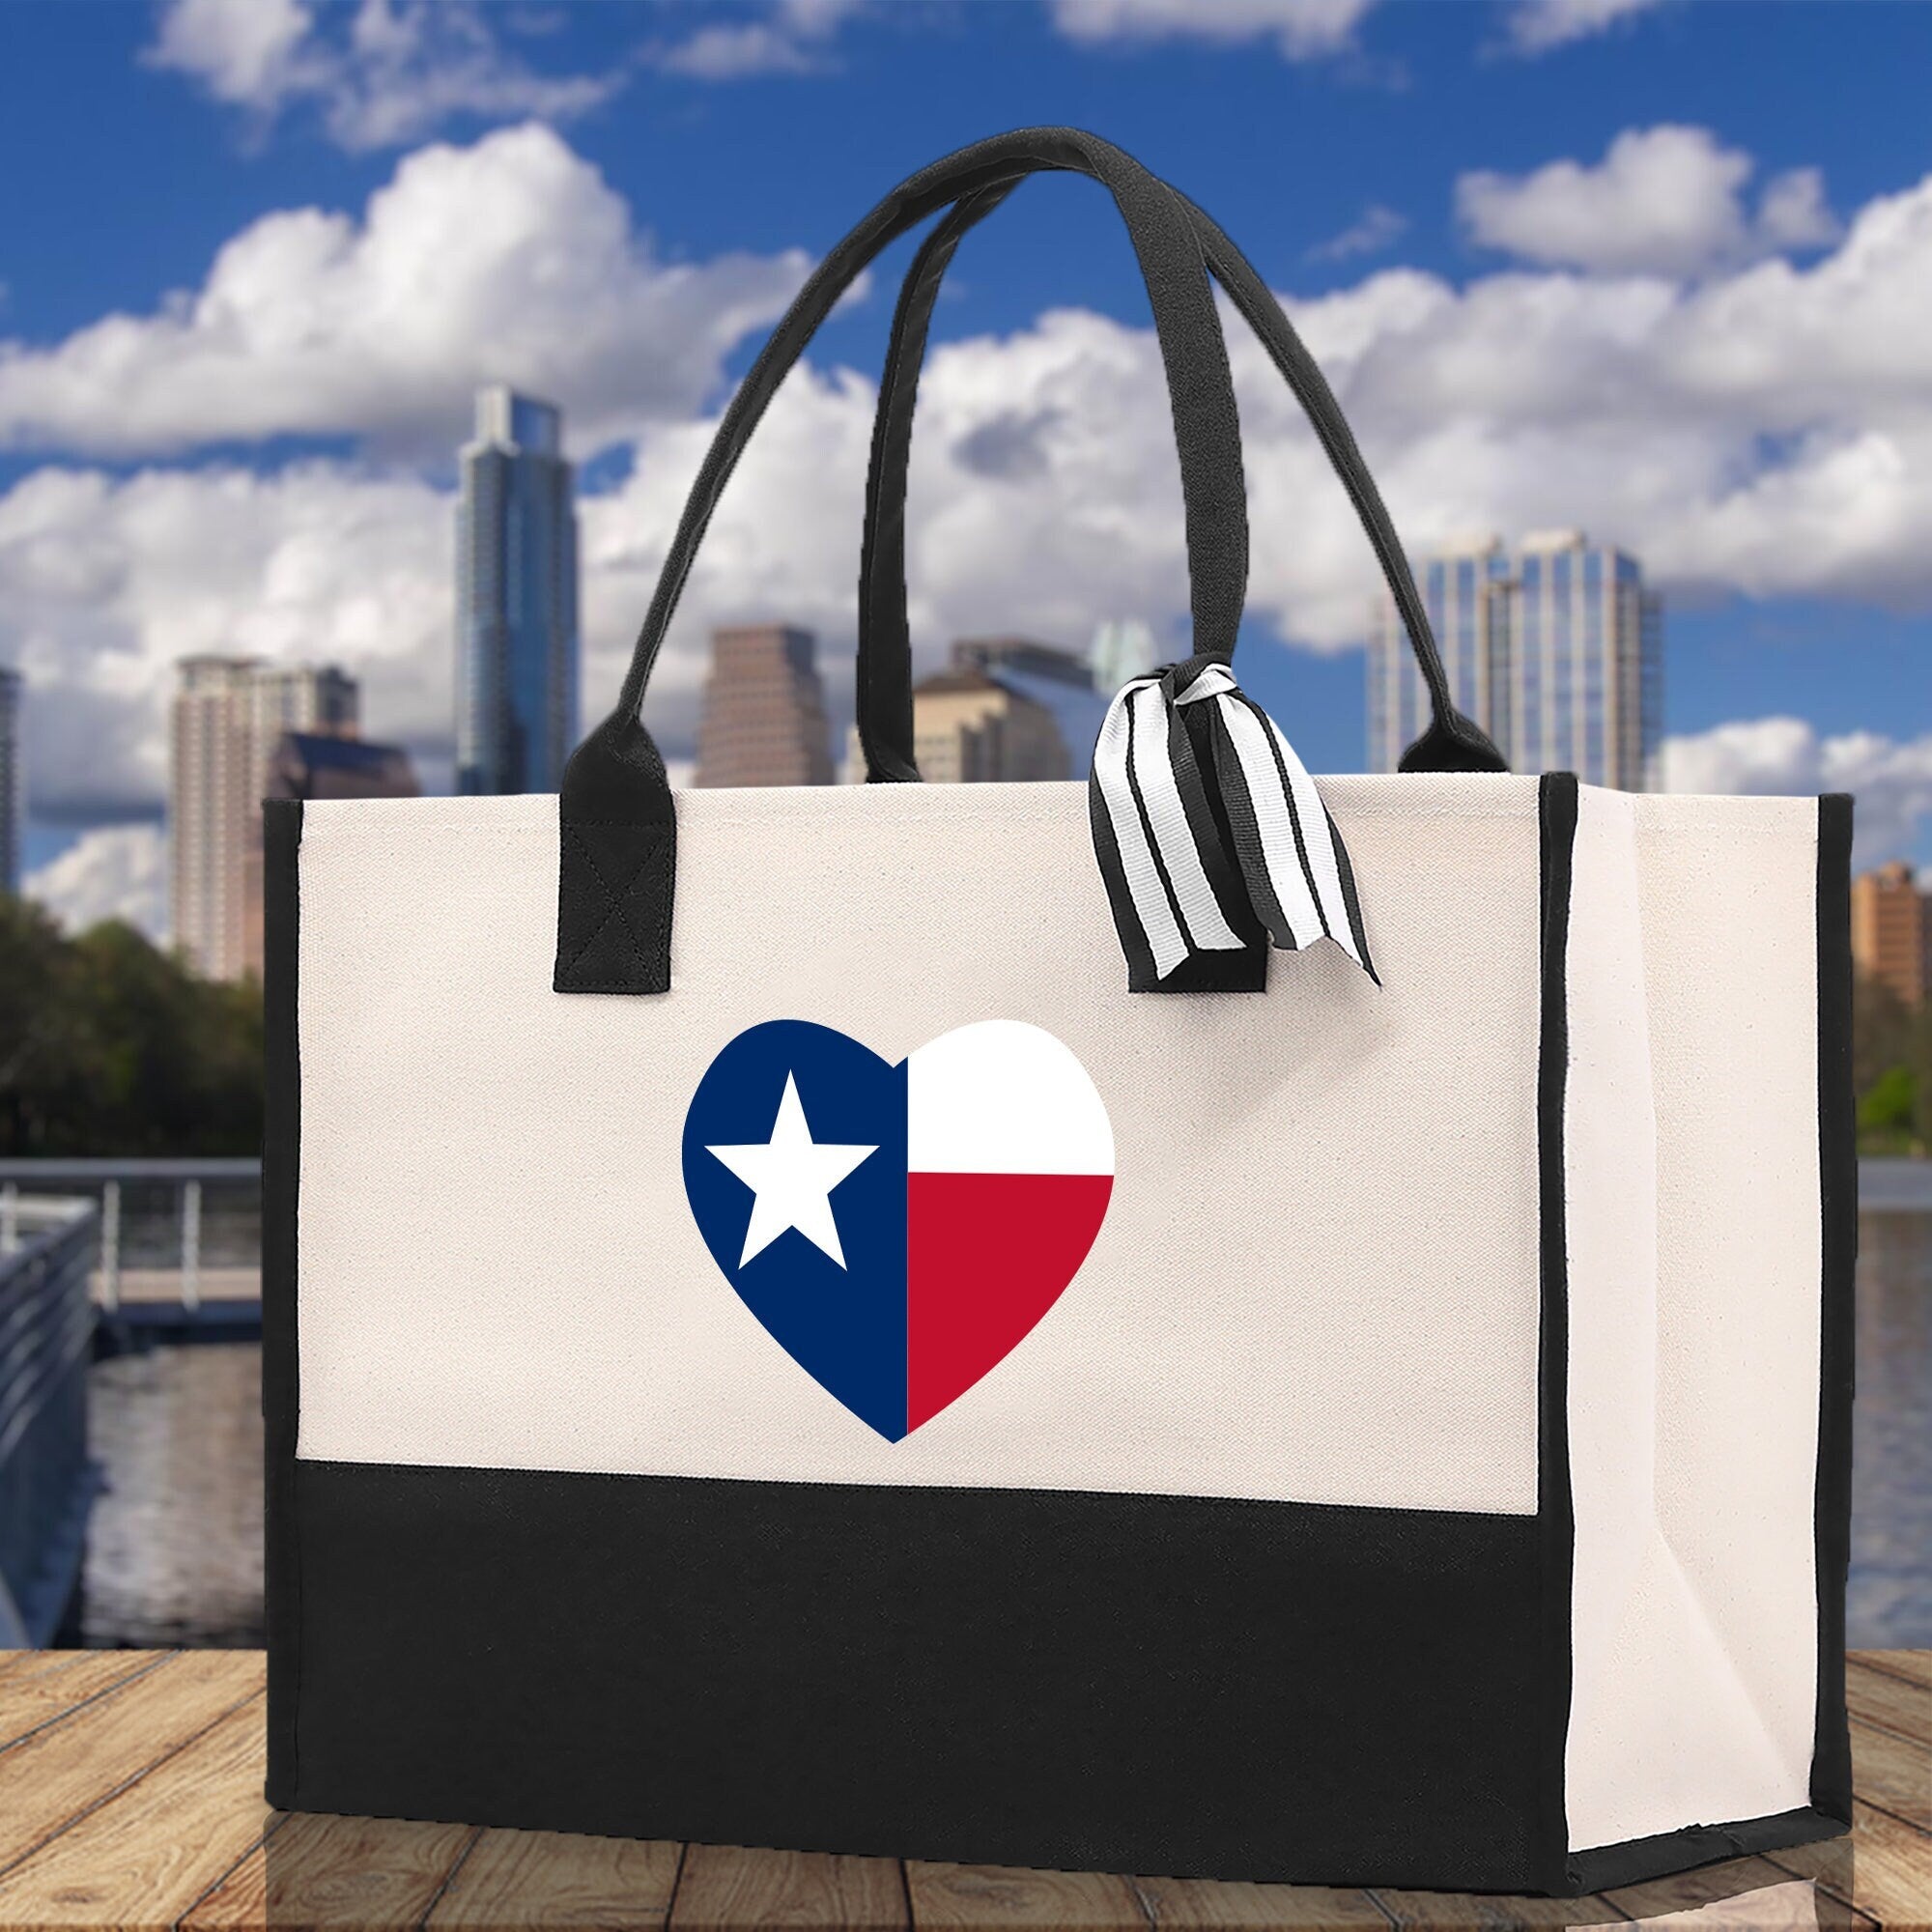 Texas Cotton Canvas Tote Bag TX Travel Vacation Tote Employee and Client Gift Wedding Favor Birthday Welcome Tote Bag Bridesmaid Gift